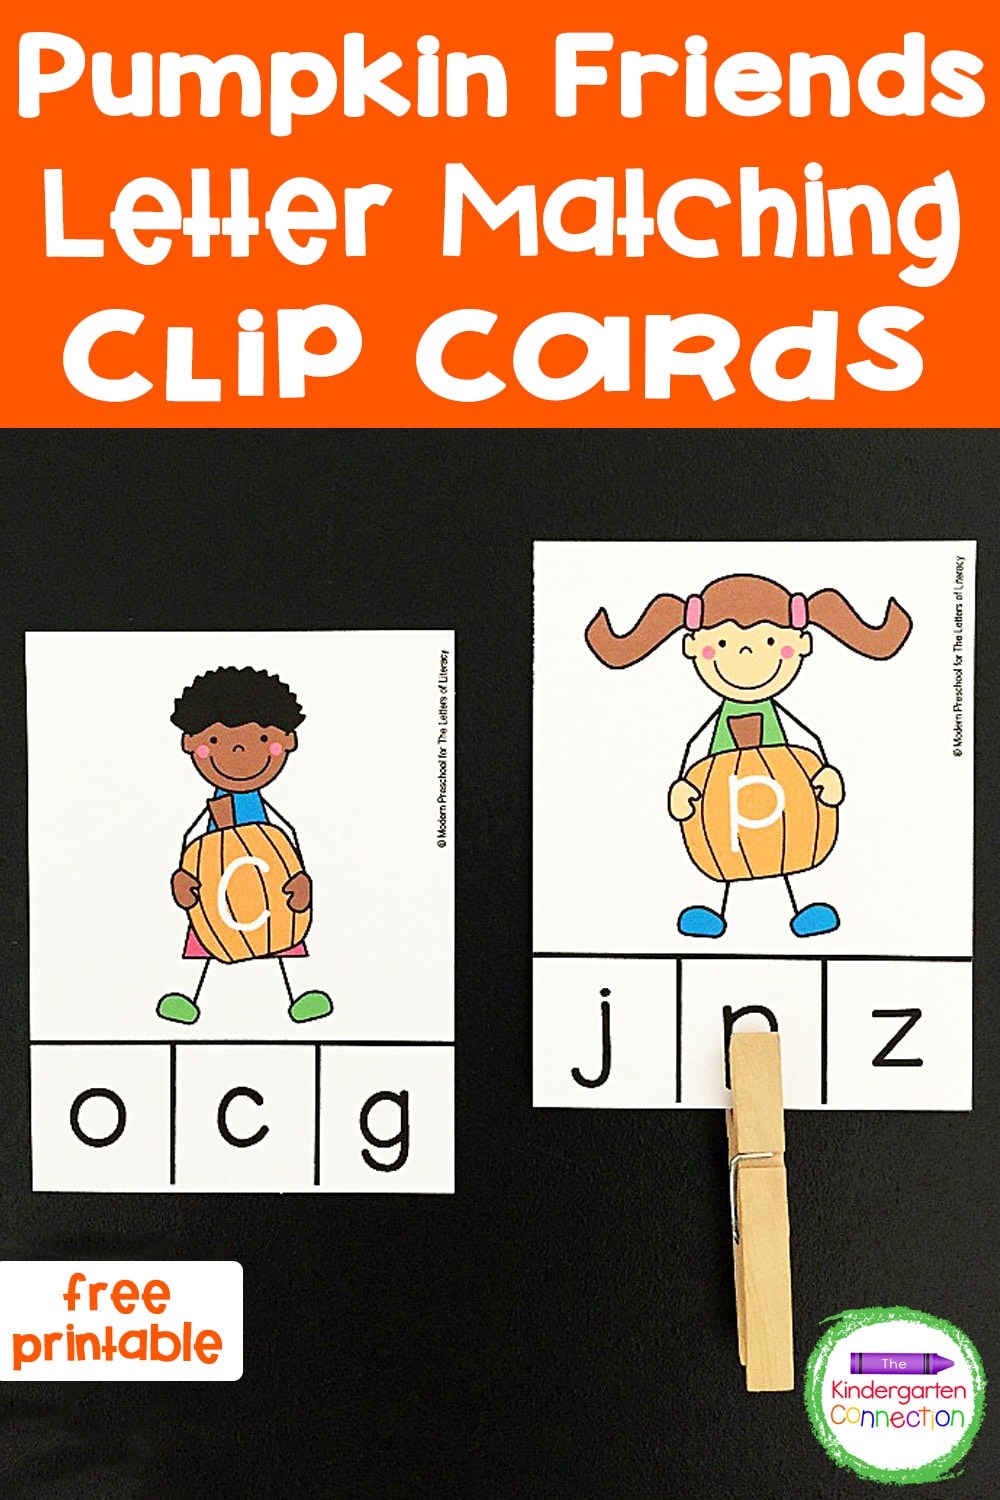 These letter matching clip cards are so fun for preschoolers and kindergarteners to learn the alphabet and build fine motor skills this fall! 